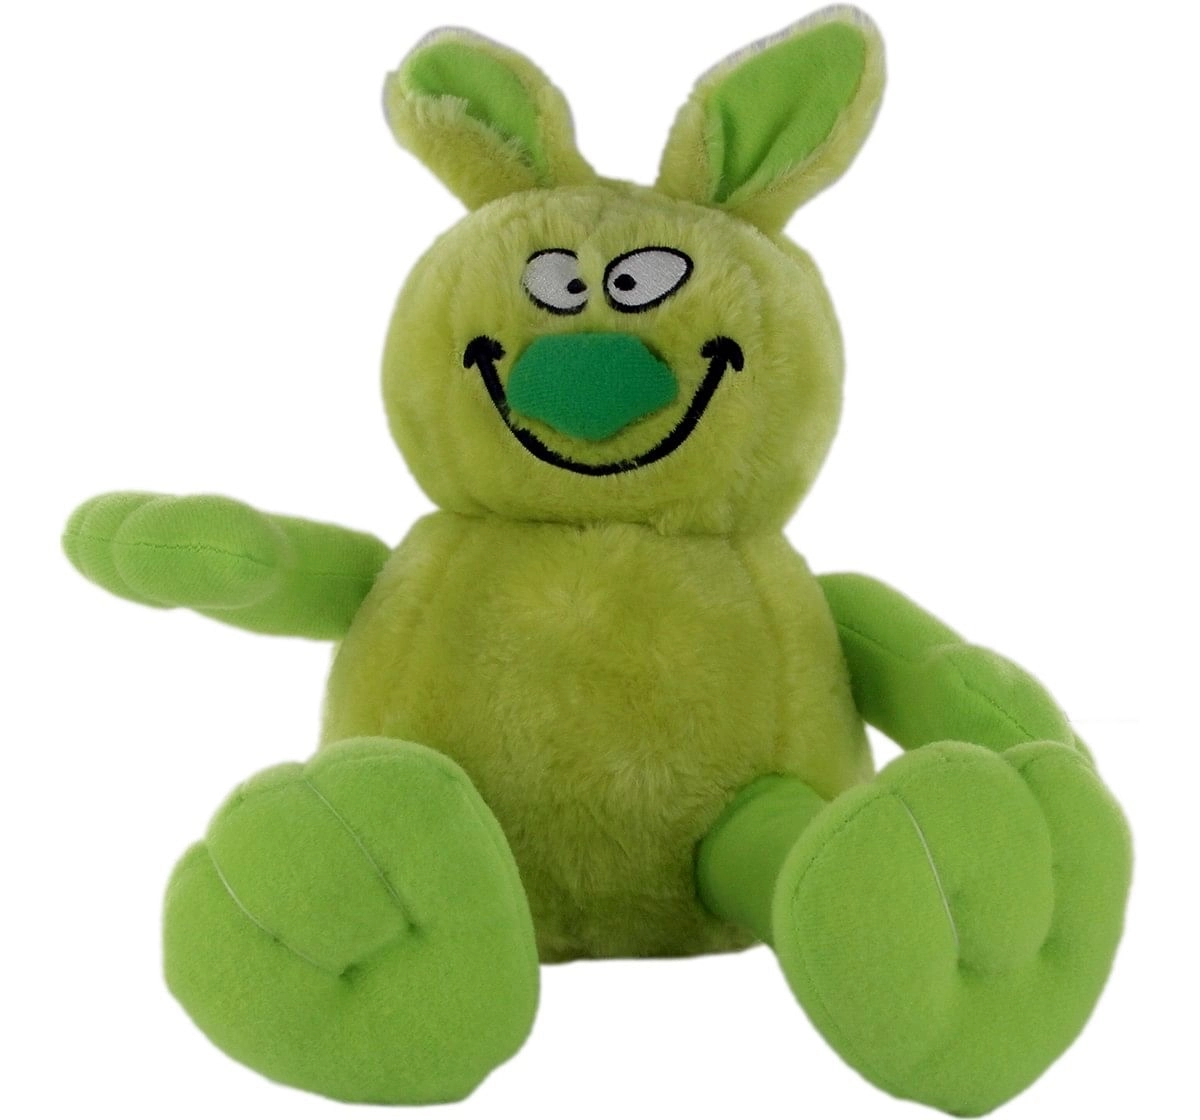 Hamleys Movers & Shakers- Ziggles Green Interactive Soft Toys for Kids age 2Y+ - 13 Cm (Green)